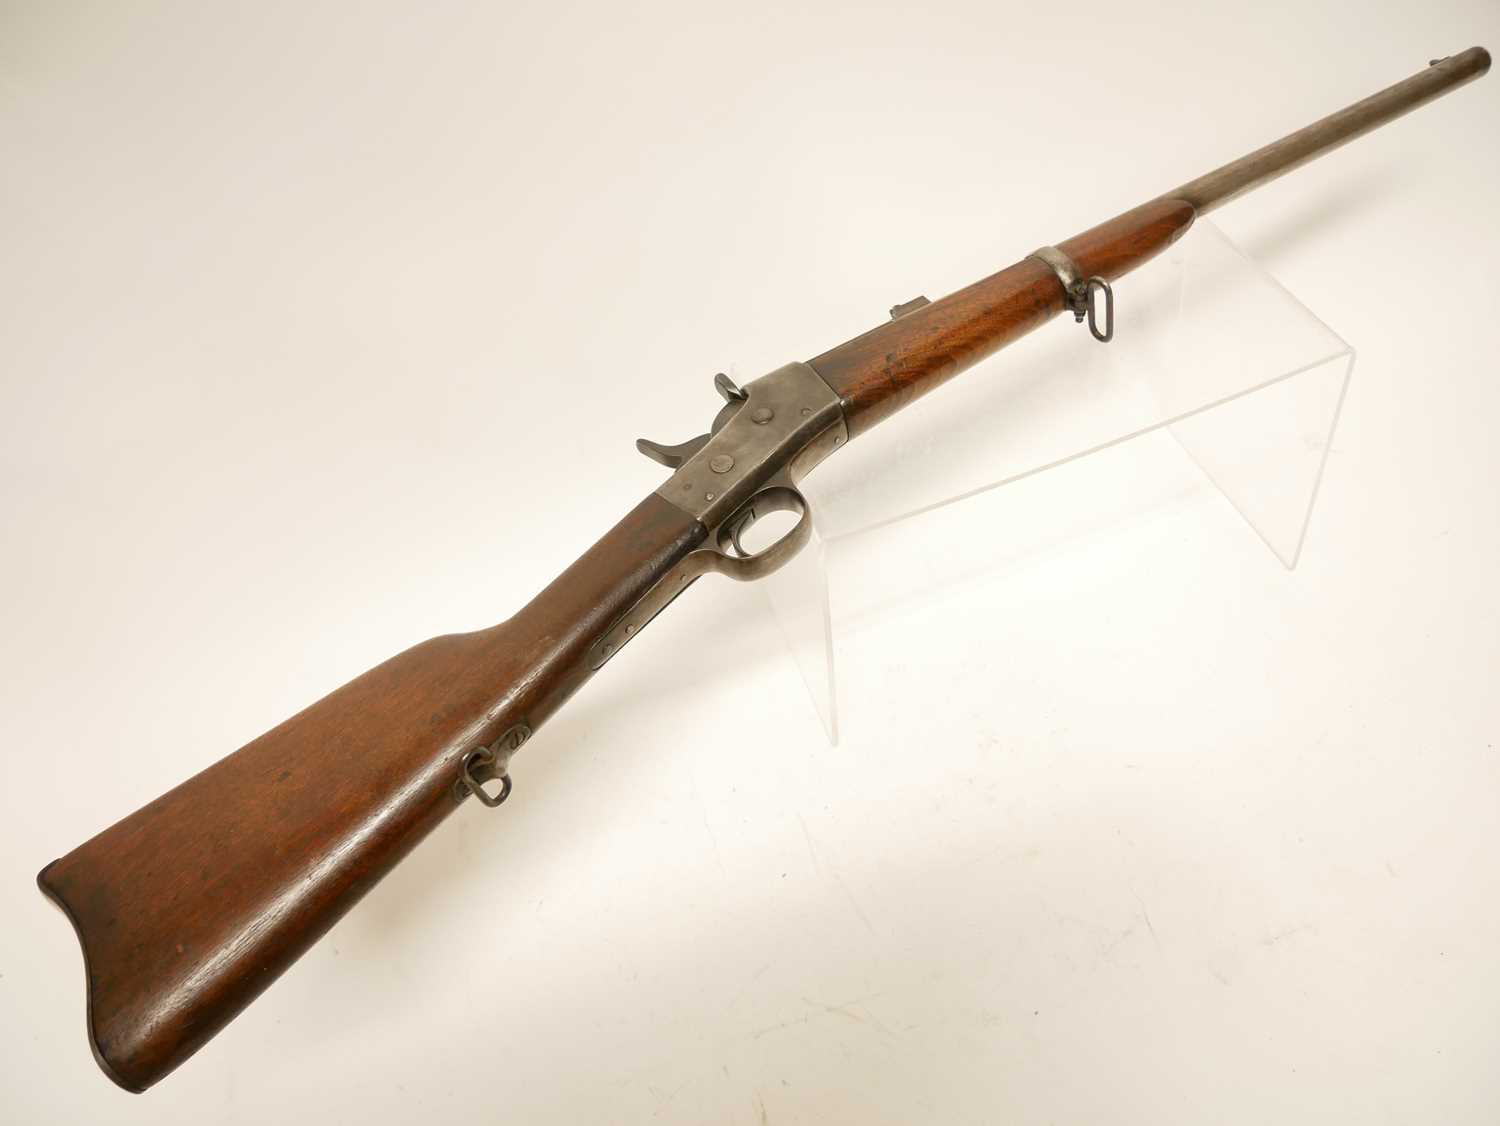 Remington .43 Spanish rolling block carbine, converted from a full length rifle, 20 inch barrel, - Image 8 of 13